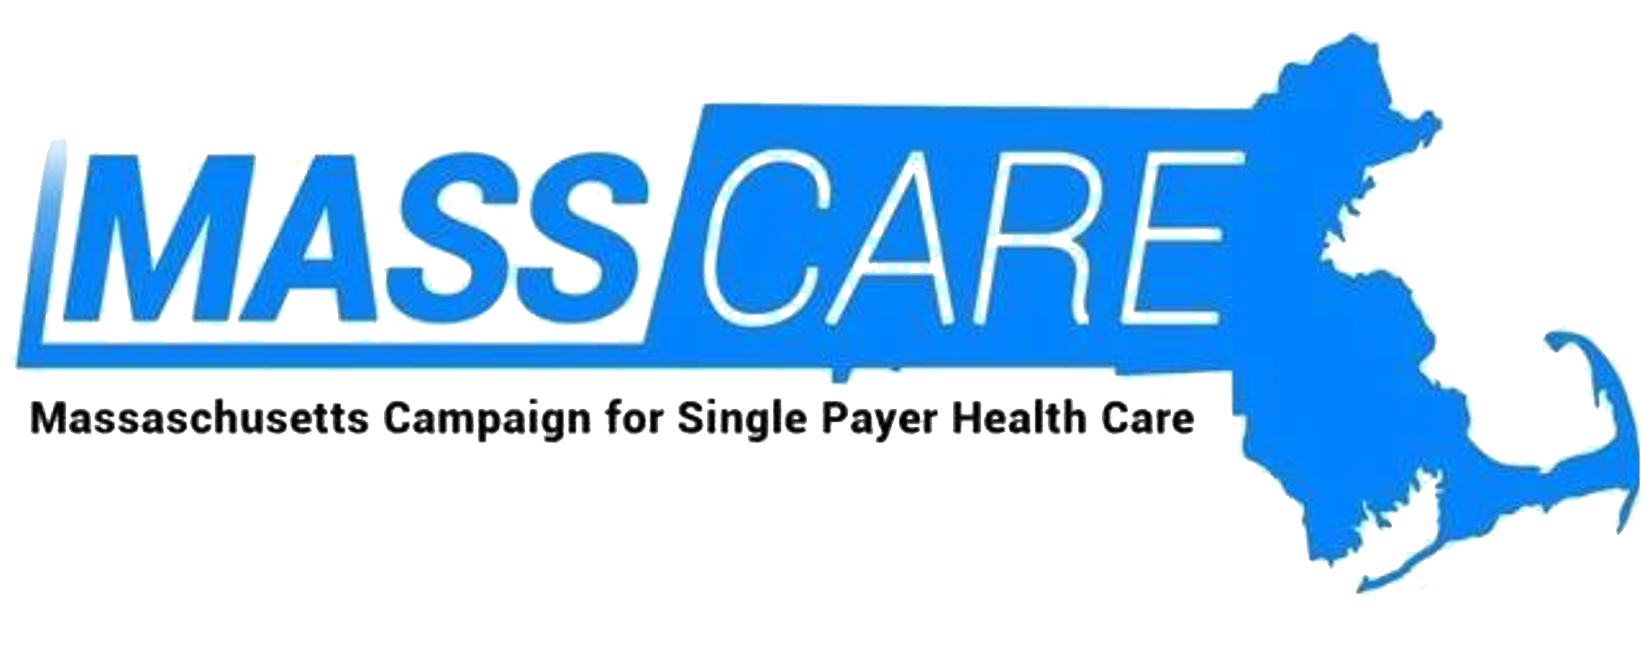 Mass Care: Massachusetts Campaign for Single Payer Healthcare